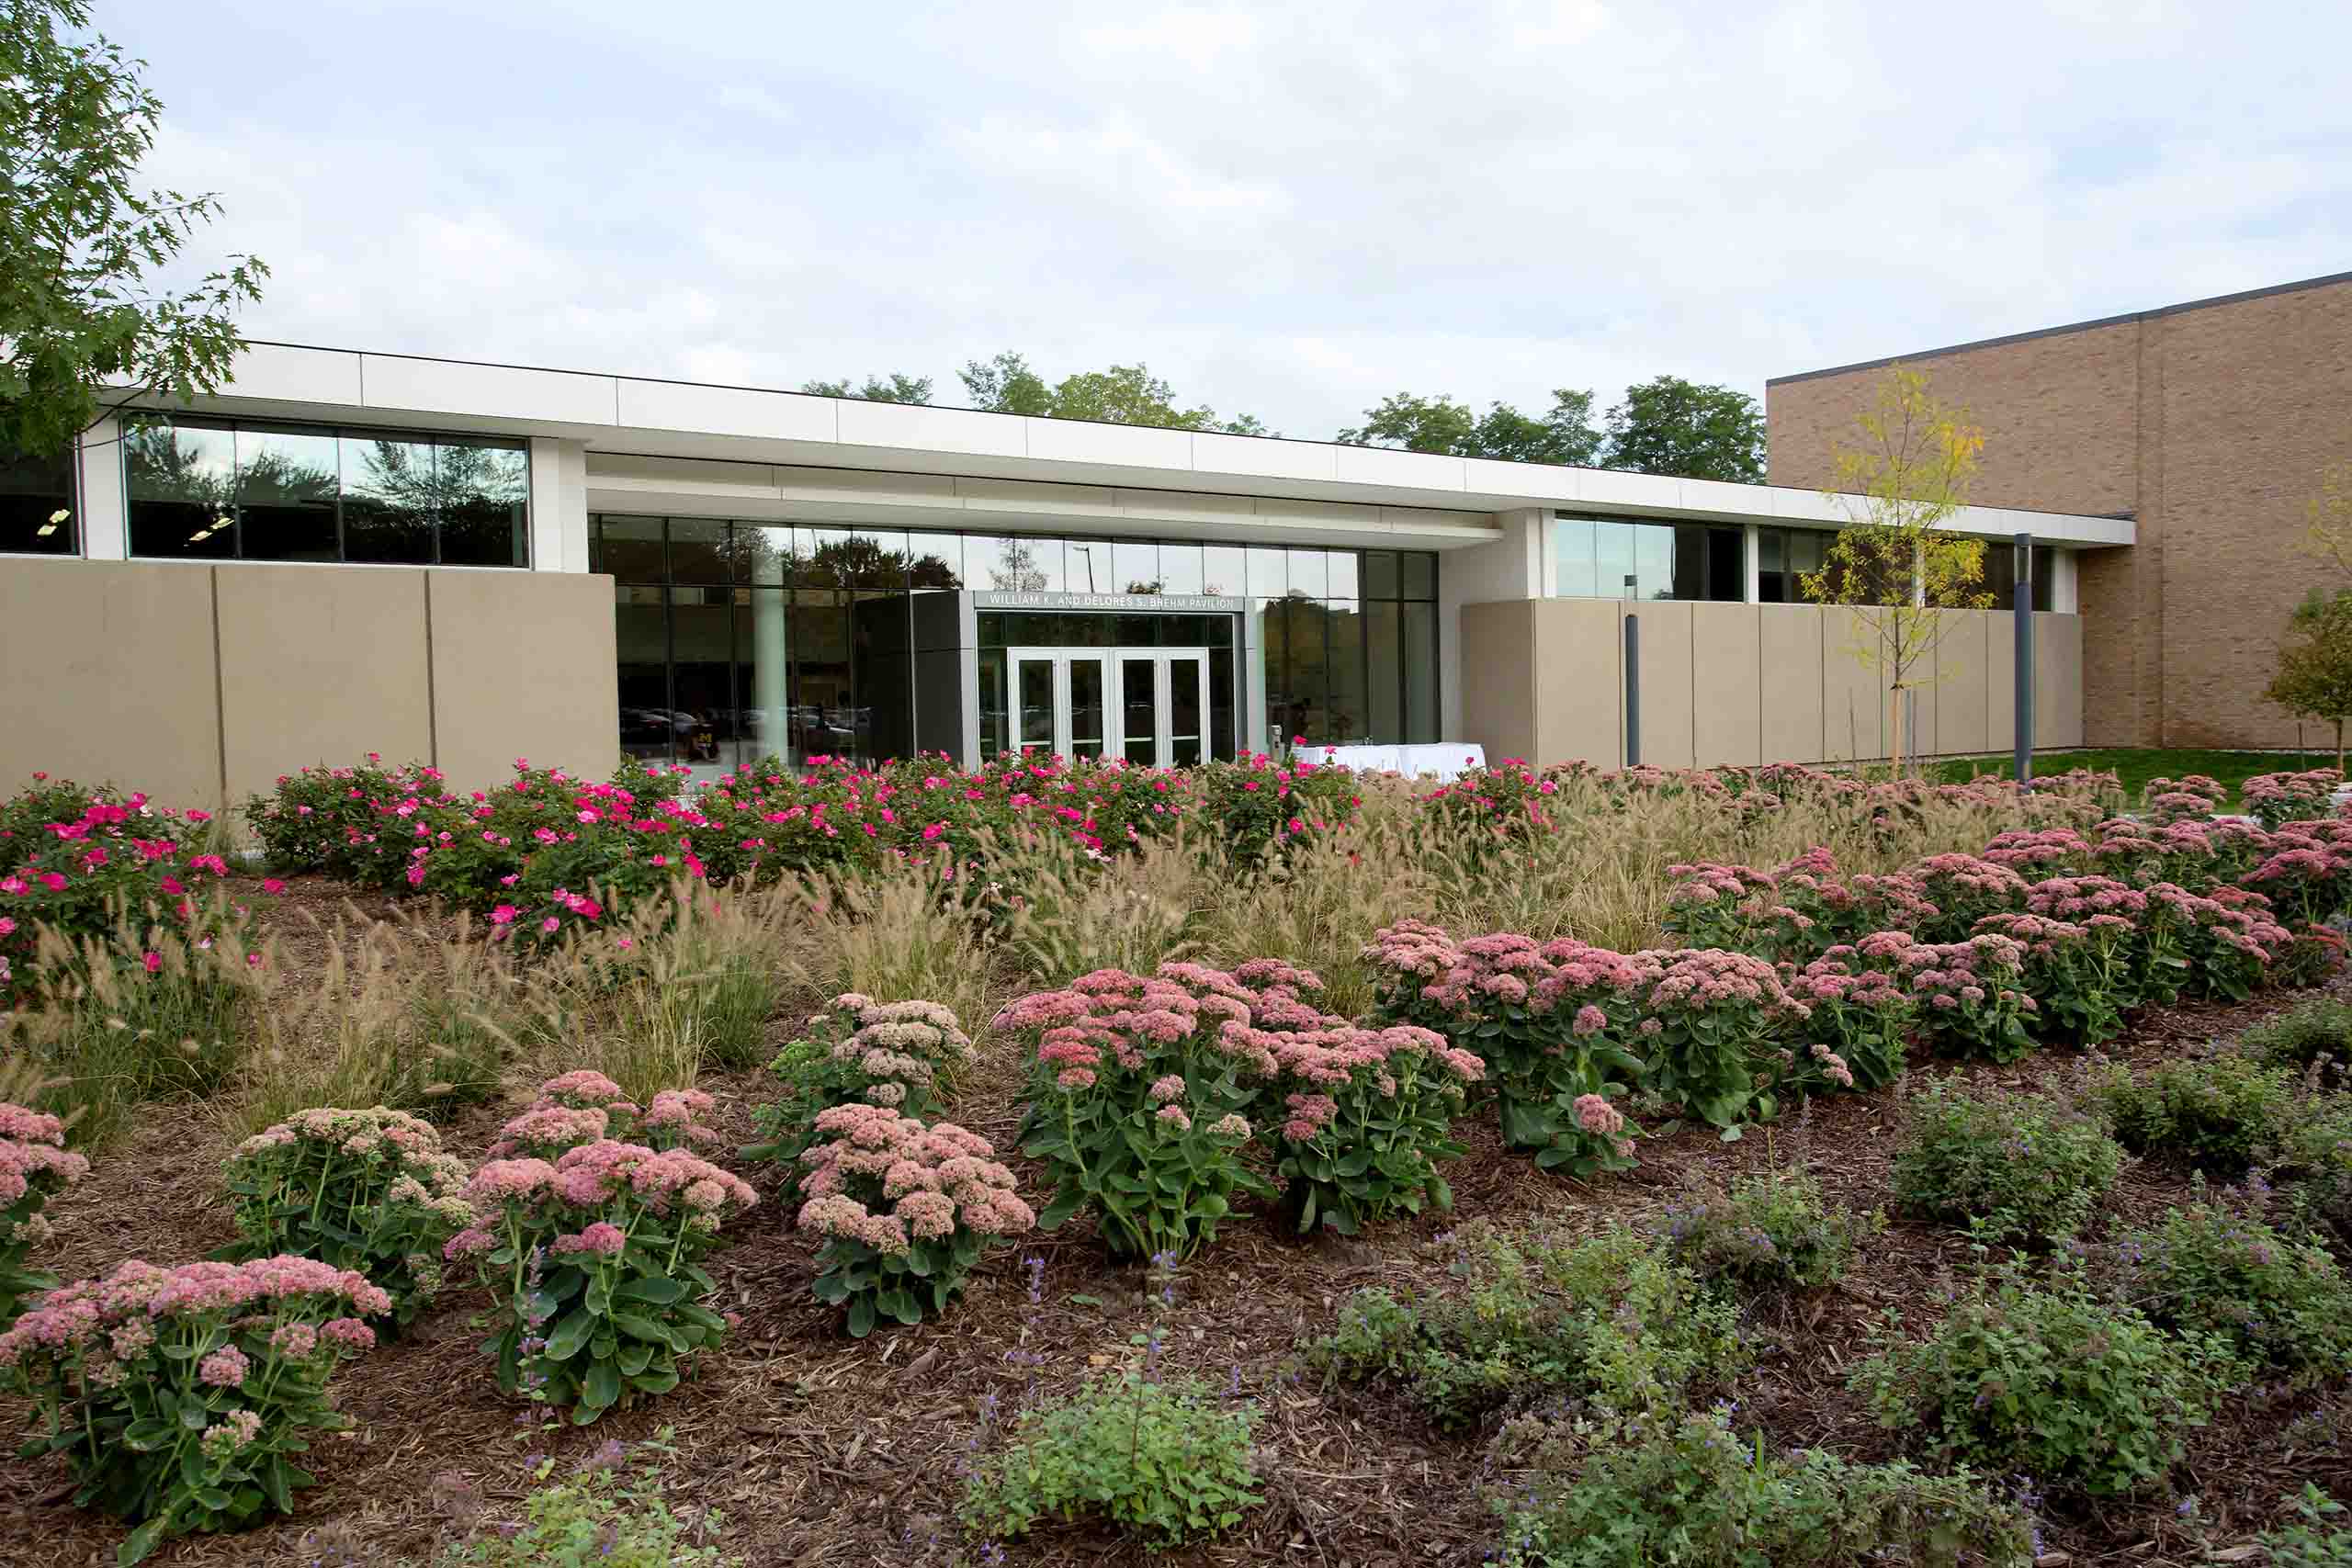 Flower beds outside the brick Moore Building; with the large glass entry doors to the Brehm Pavilion.